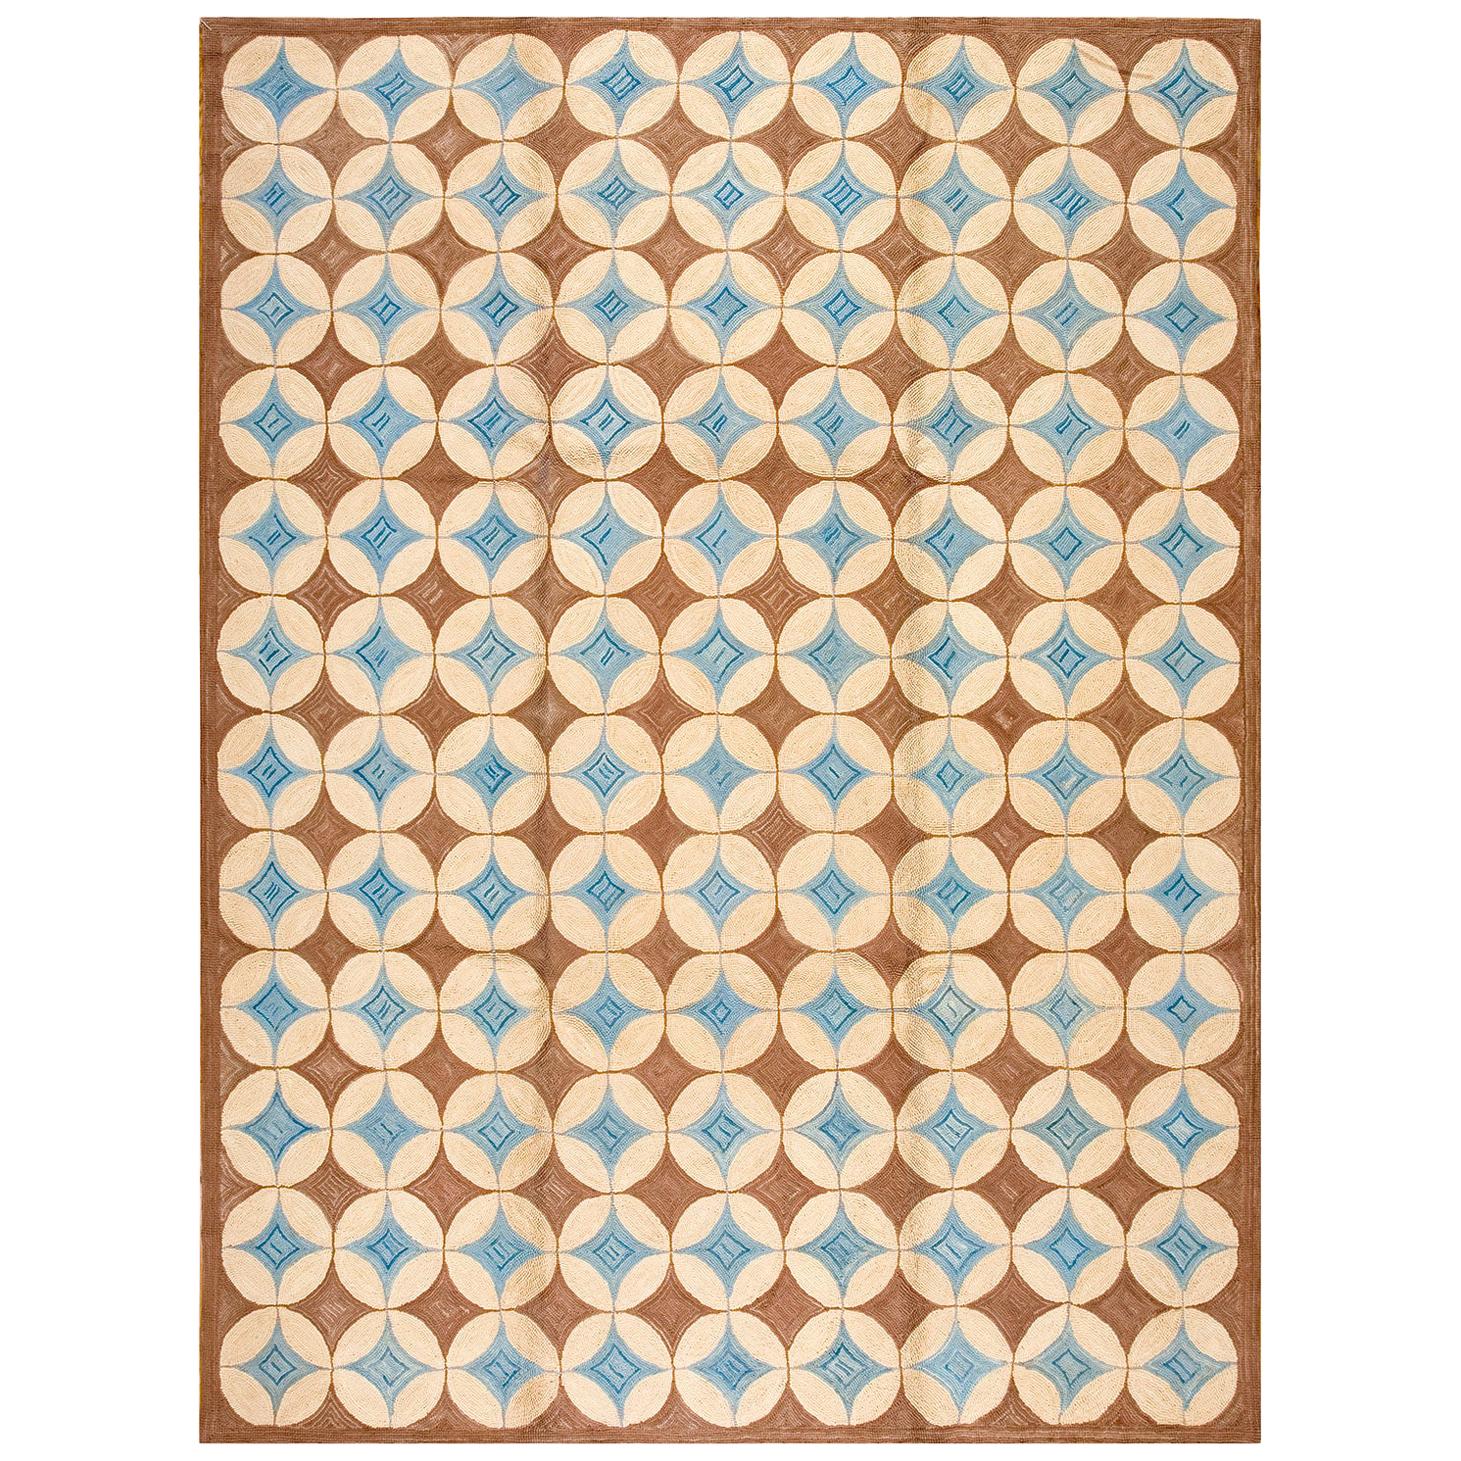 Contemporary  Hooked Rug (6' x 9' - 183 x 274 )